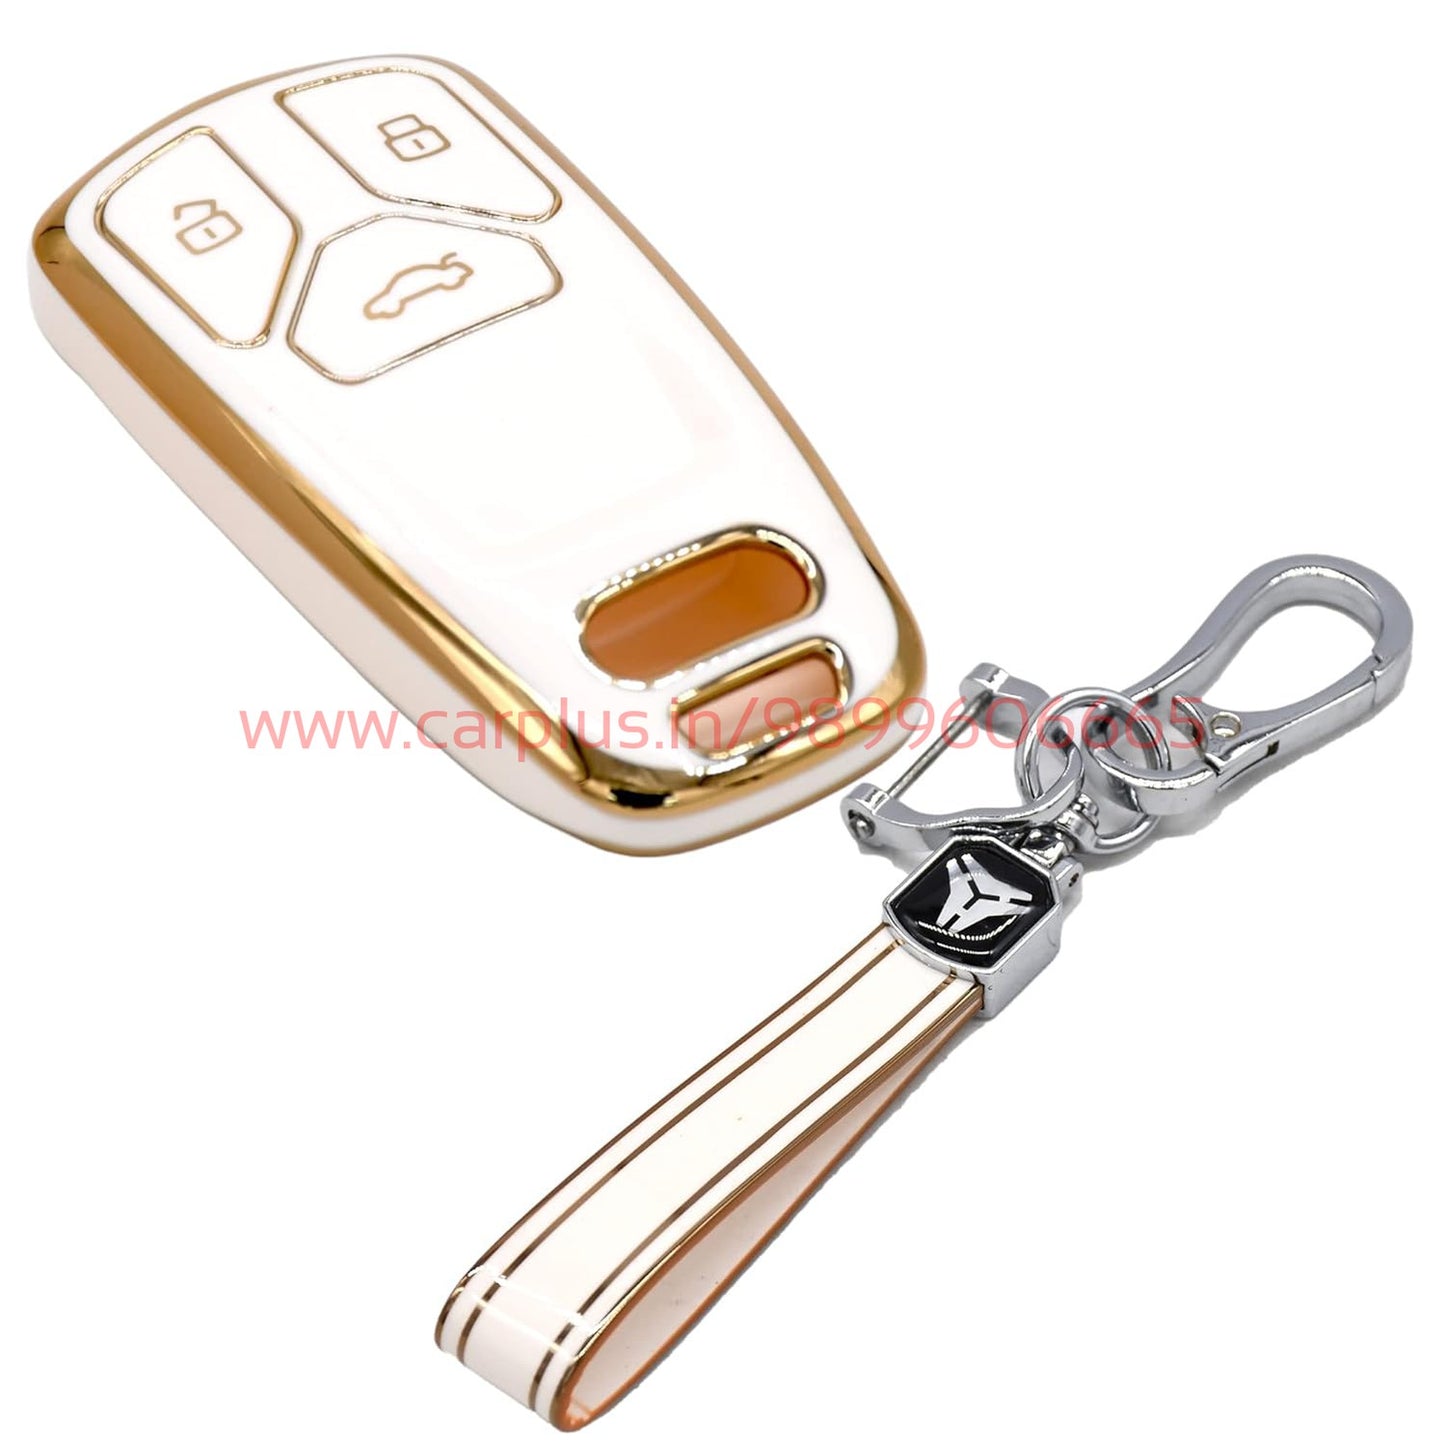 
                  
                    KMH TPU Gold Car Key Cover Compatible with Audi A4 TT TTS Q7 2016 2017 Key cover-TPU GOLD KEY COVER-KMH-KEY COVER-White with Keychain-CARPLUS
                  
                